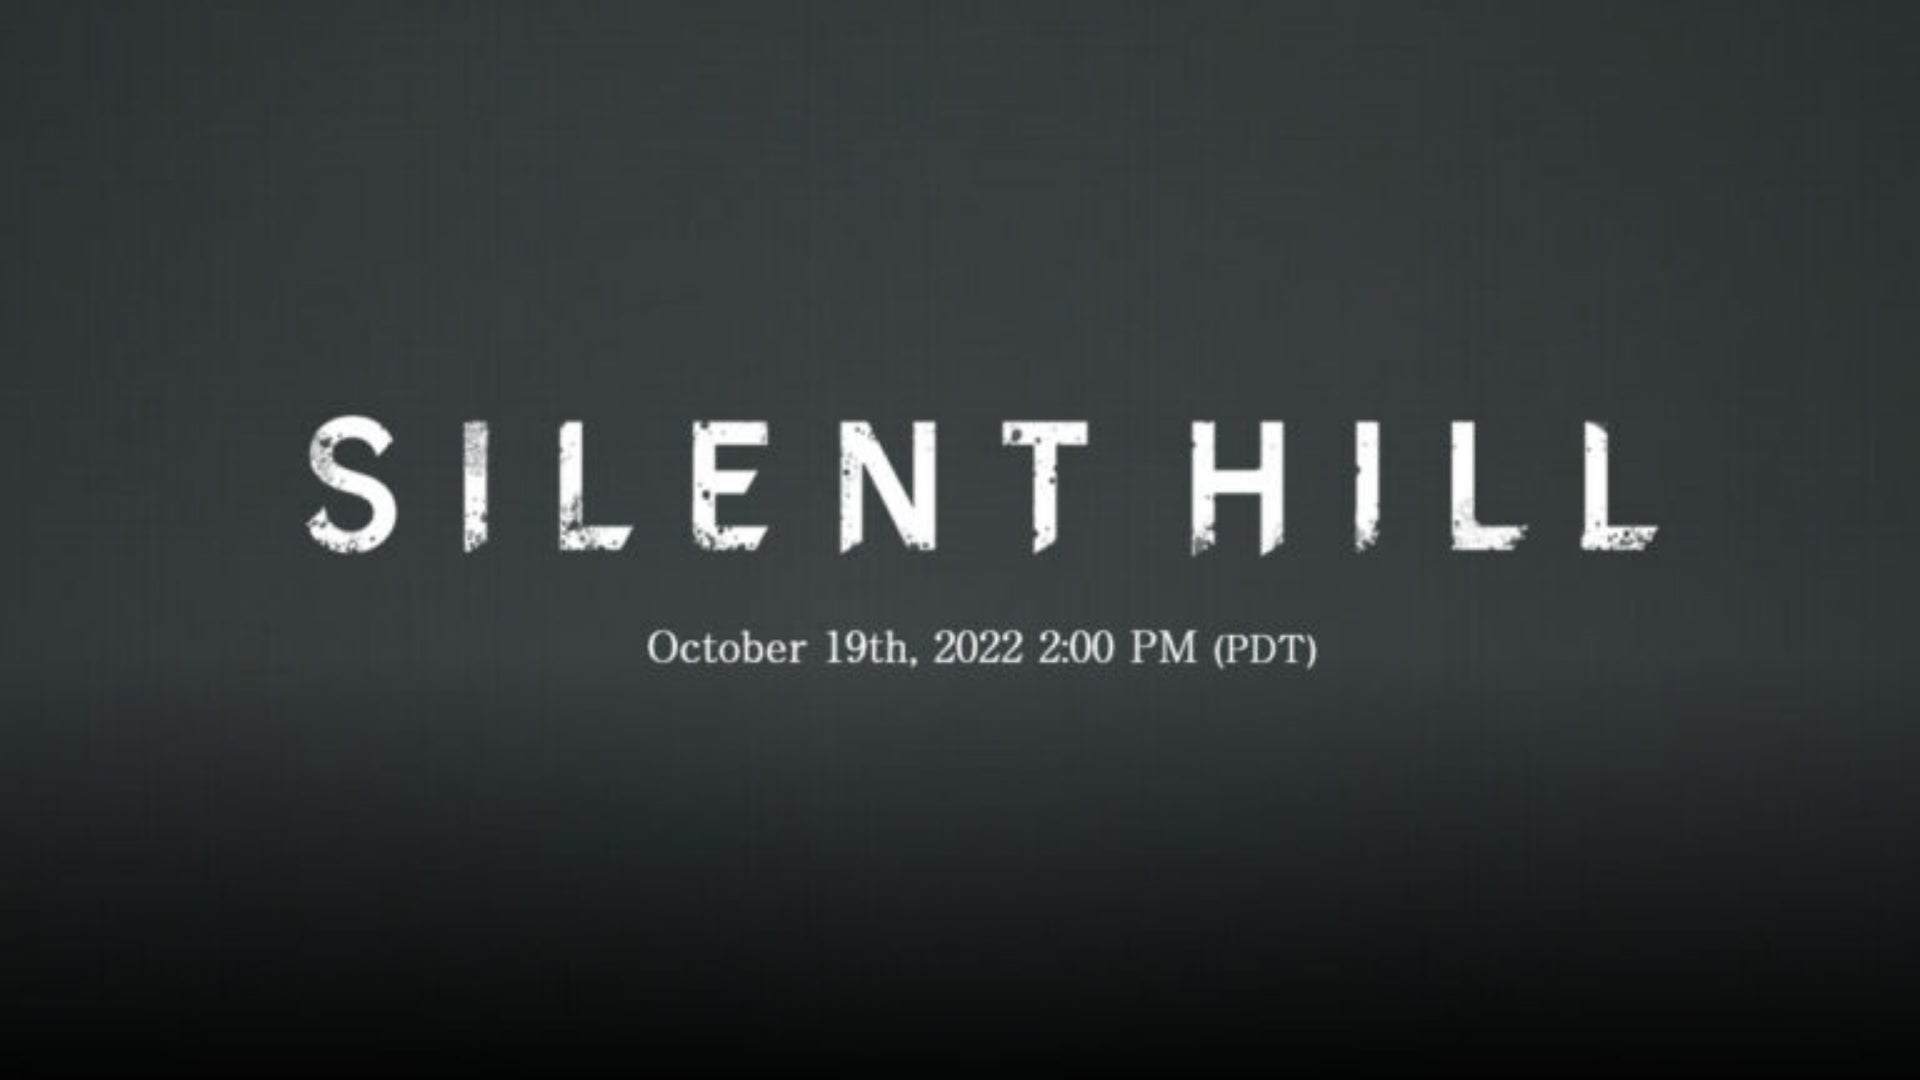 Image for Konami reveals that Silent Hill is making a comeback, more information coming on Wednesday